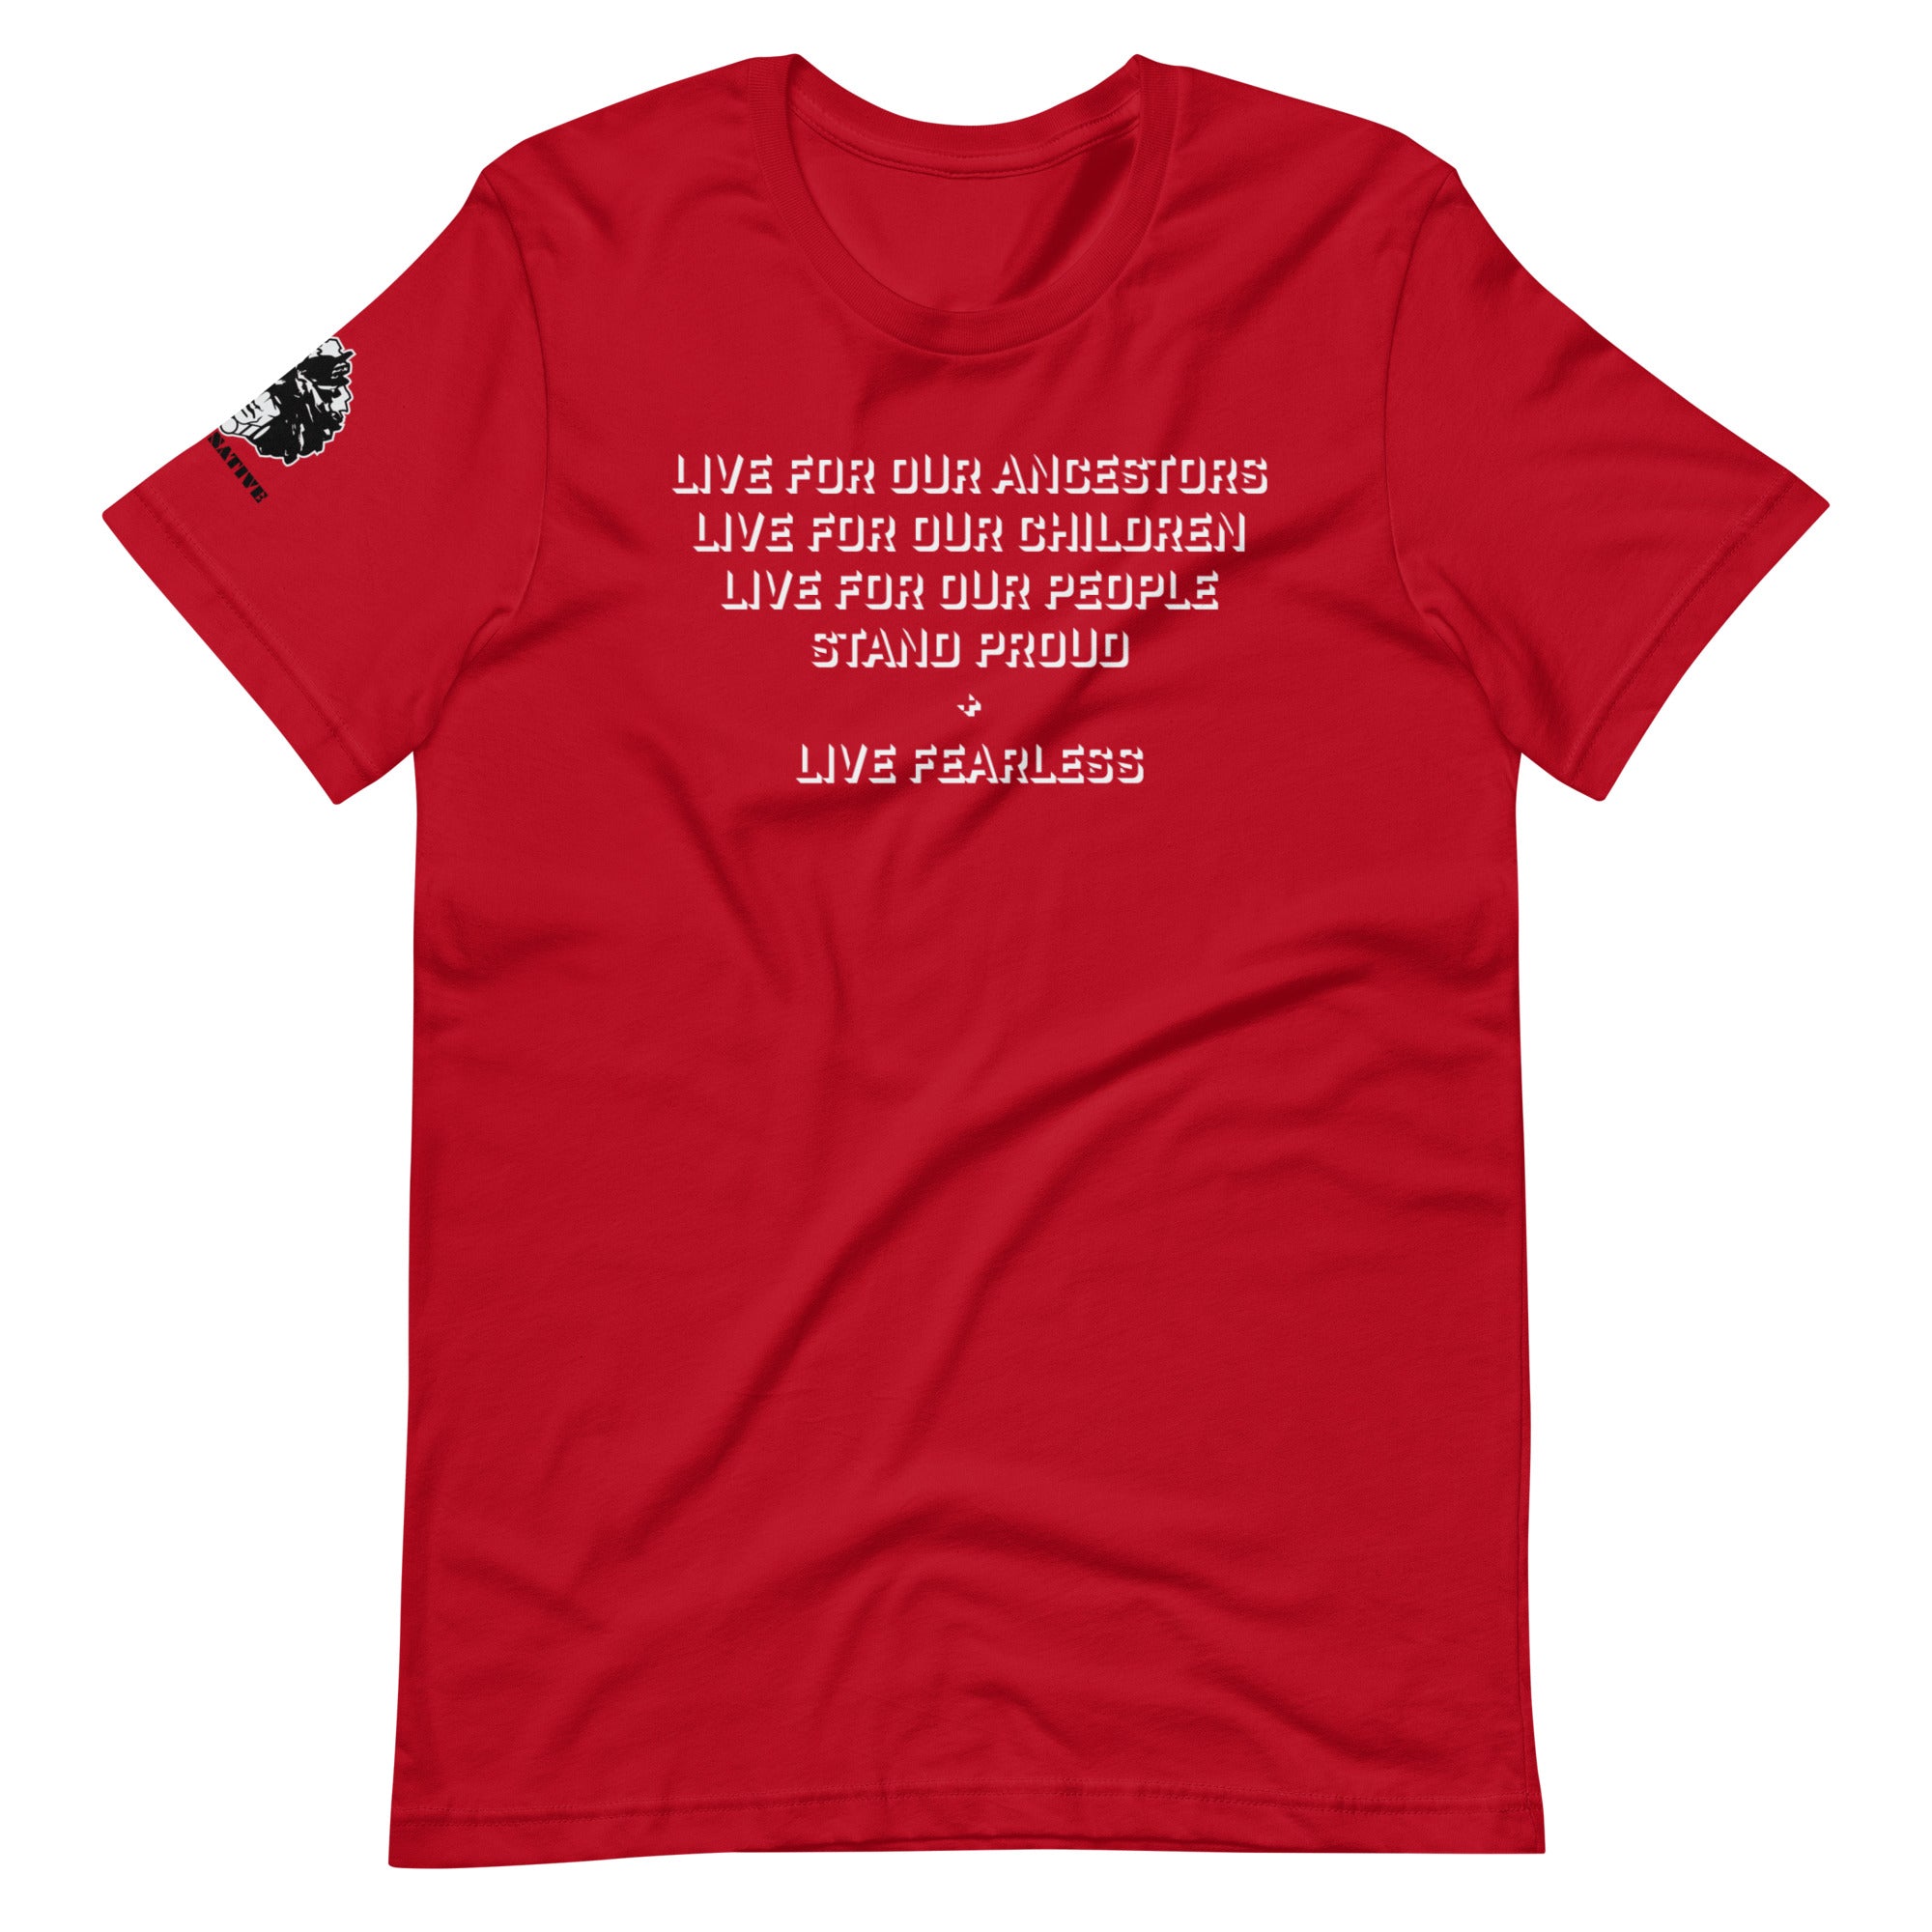 Live for Our People t-shirt